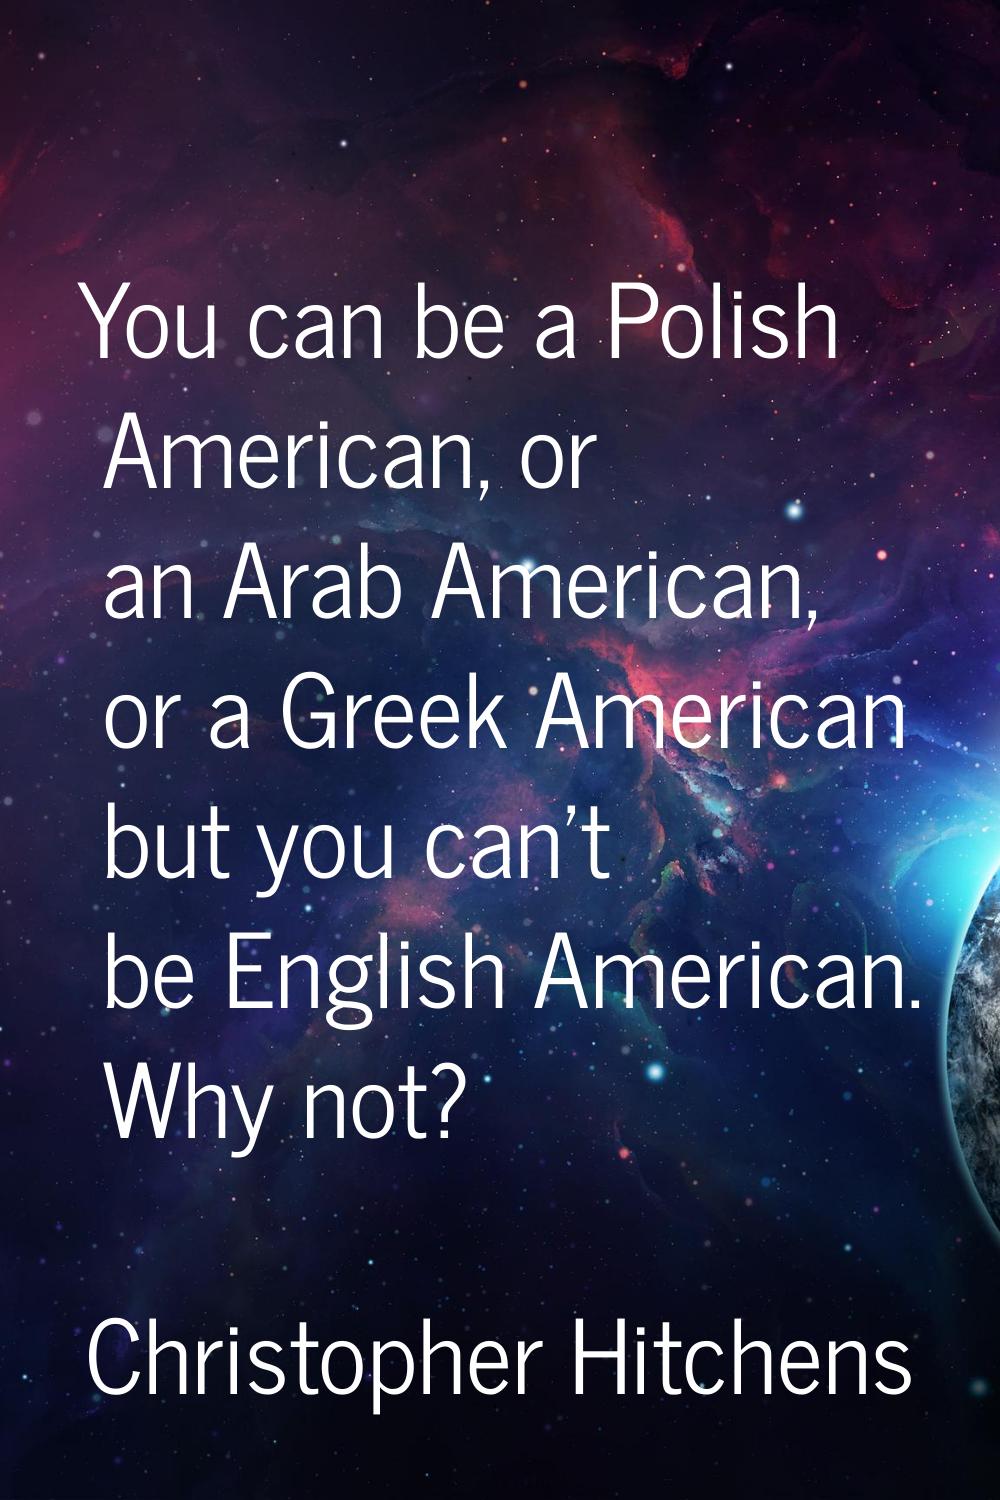 You can be a Polish American, or an Arab American, or a Greek American but you can't be English Ame